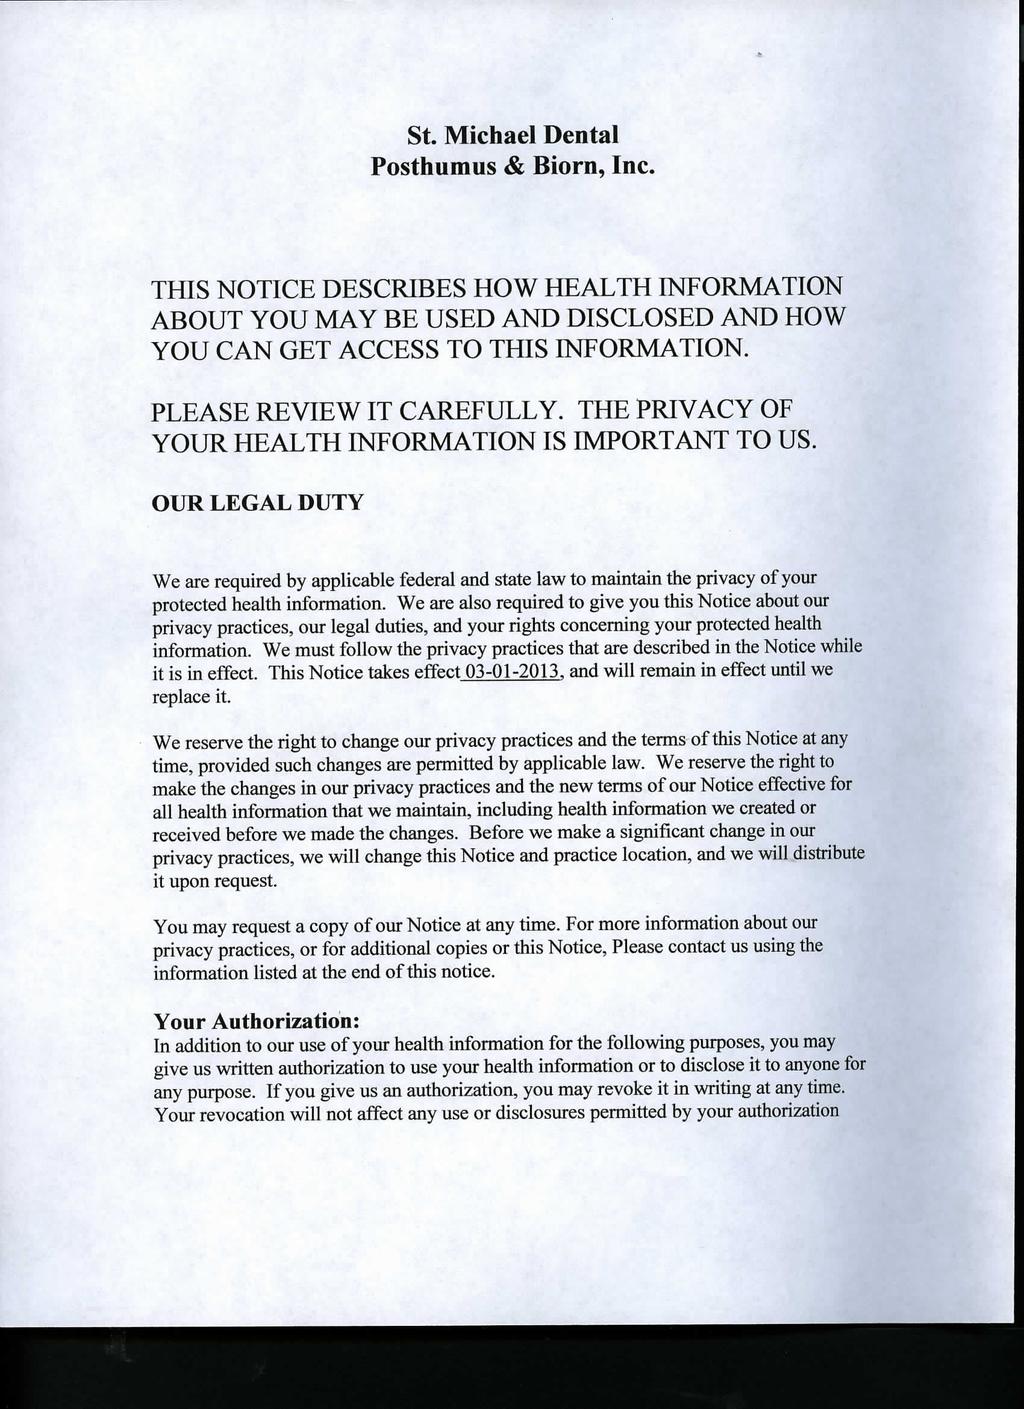 St. Michael Dental Posthumus & Biorn, Inc. THIS NOTICE DESCRIBES HOW HEALTH INFORMATION ABOUT YOU MAY BE USED AND DISCLOSED AND HOW YOU CAN GET ACCESS TO THIS INFORMATION. PLEASE REVIEW IT CAREFULLY.